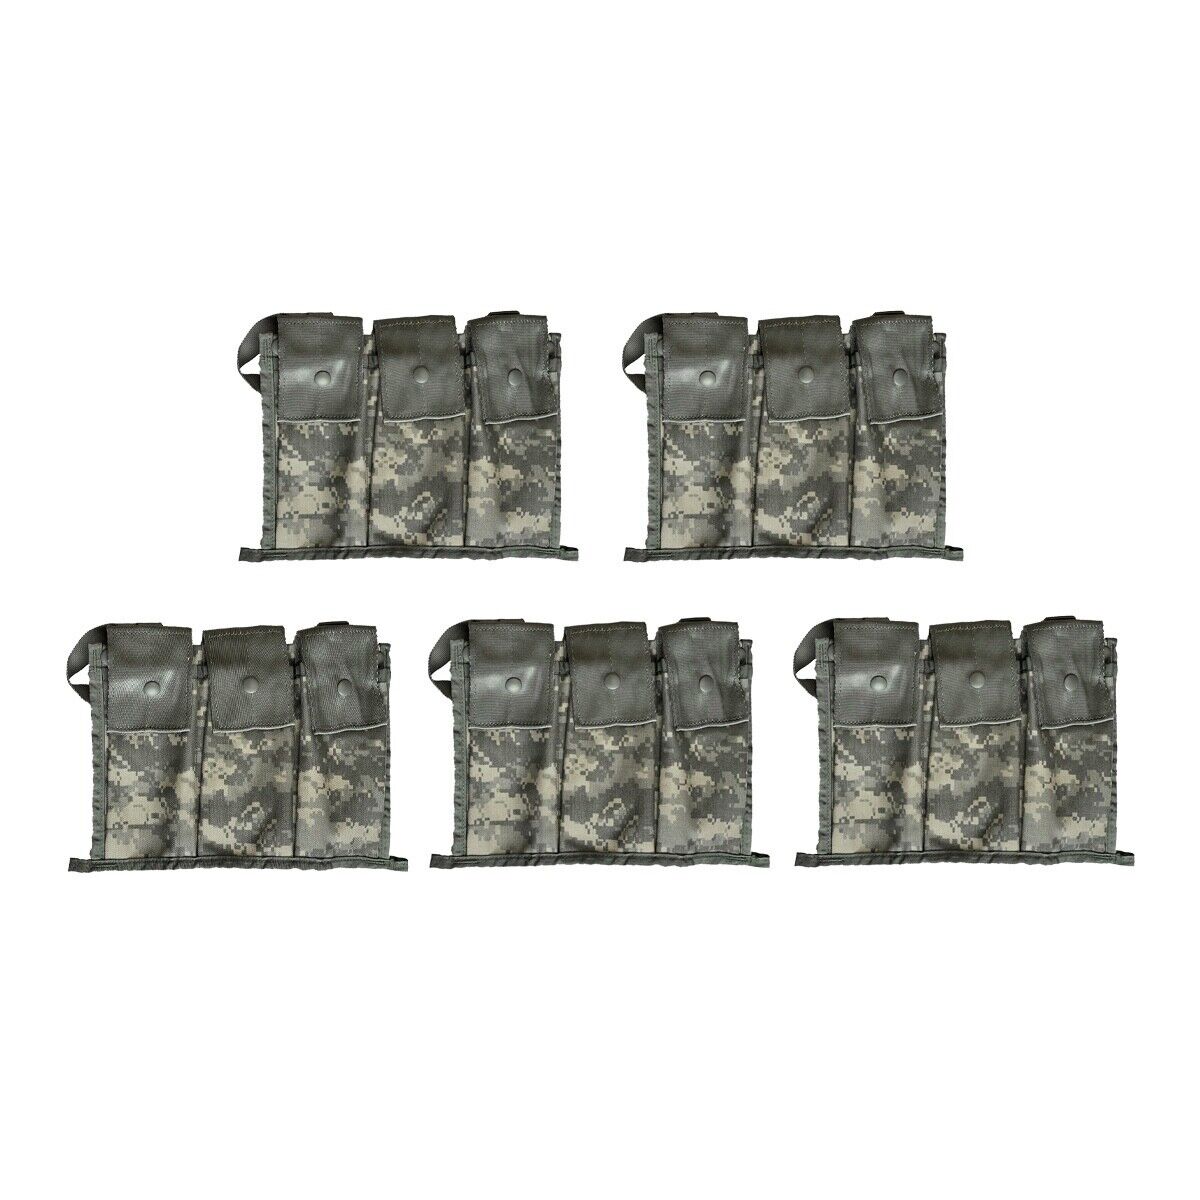 Pack of 5 Military 6 Magazine Bandoleer MOLLE II Mag Ammunition Pouch w/ Strap